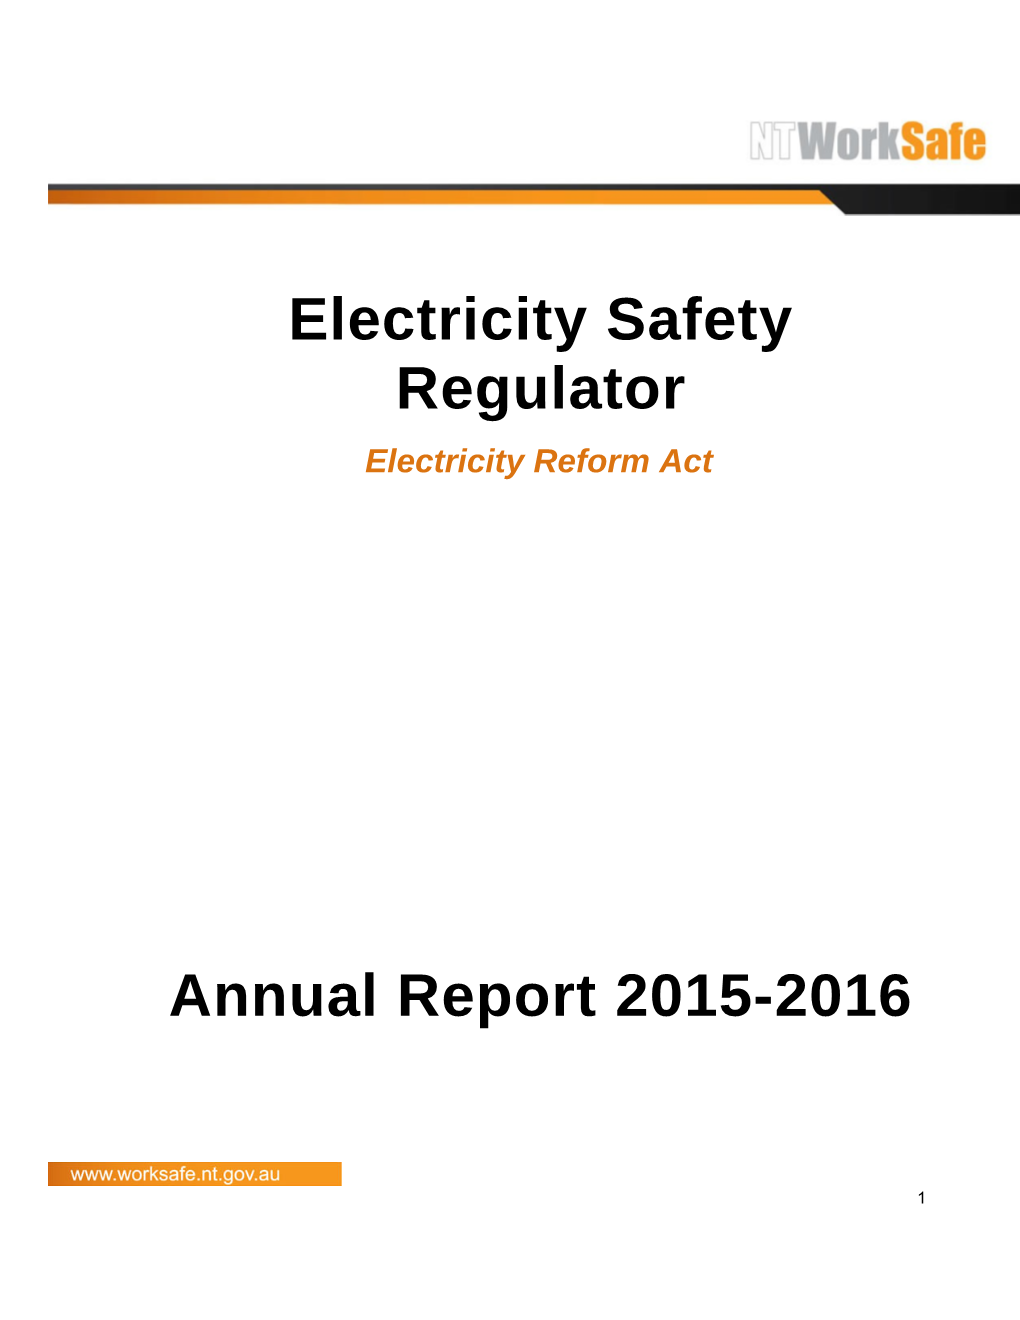 Electricity Safety Regulator Annual Report 2015-2016